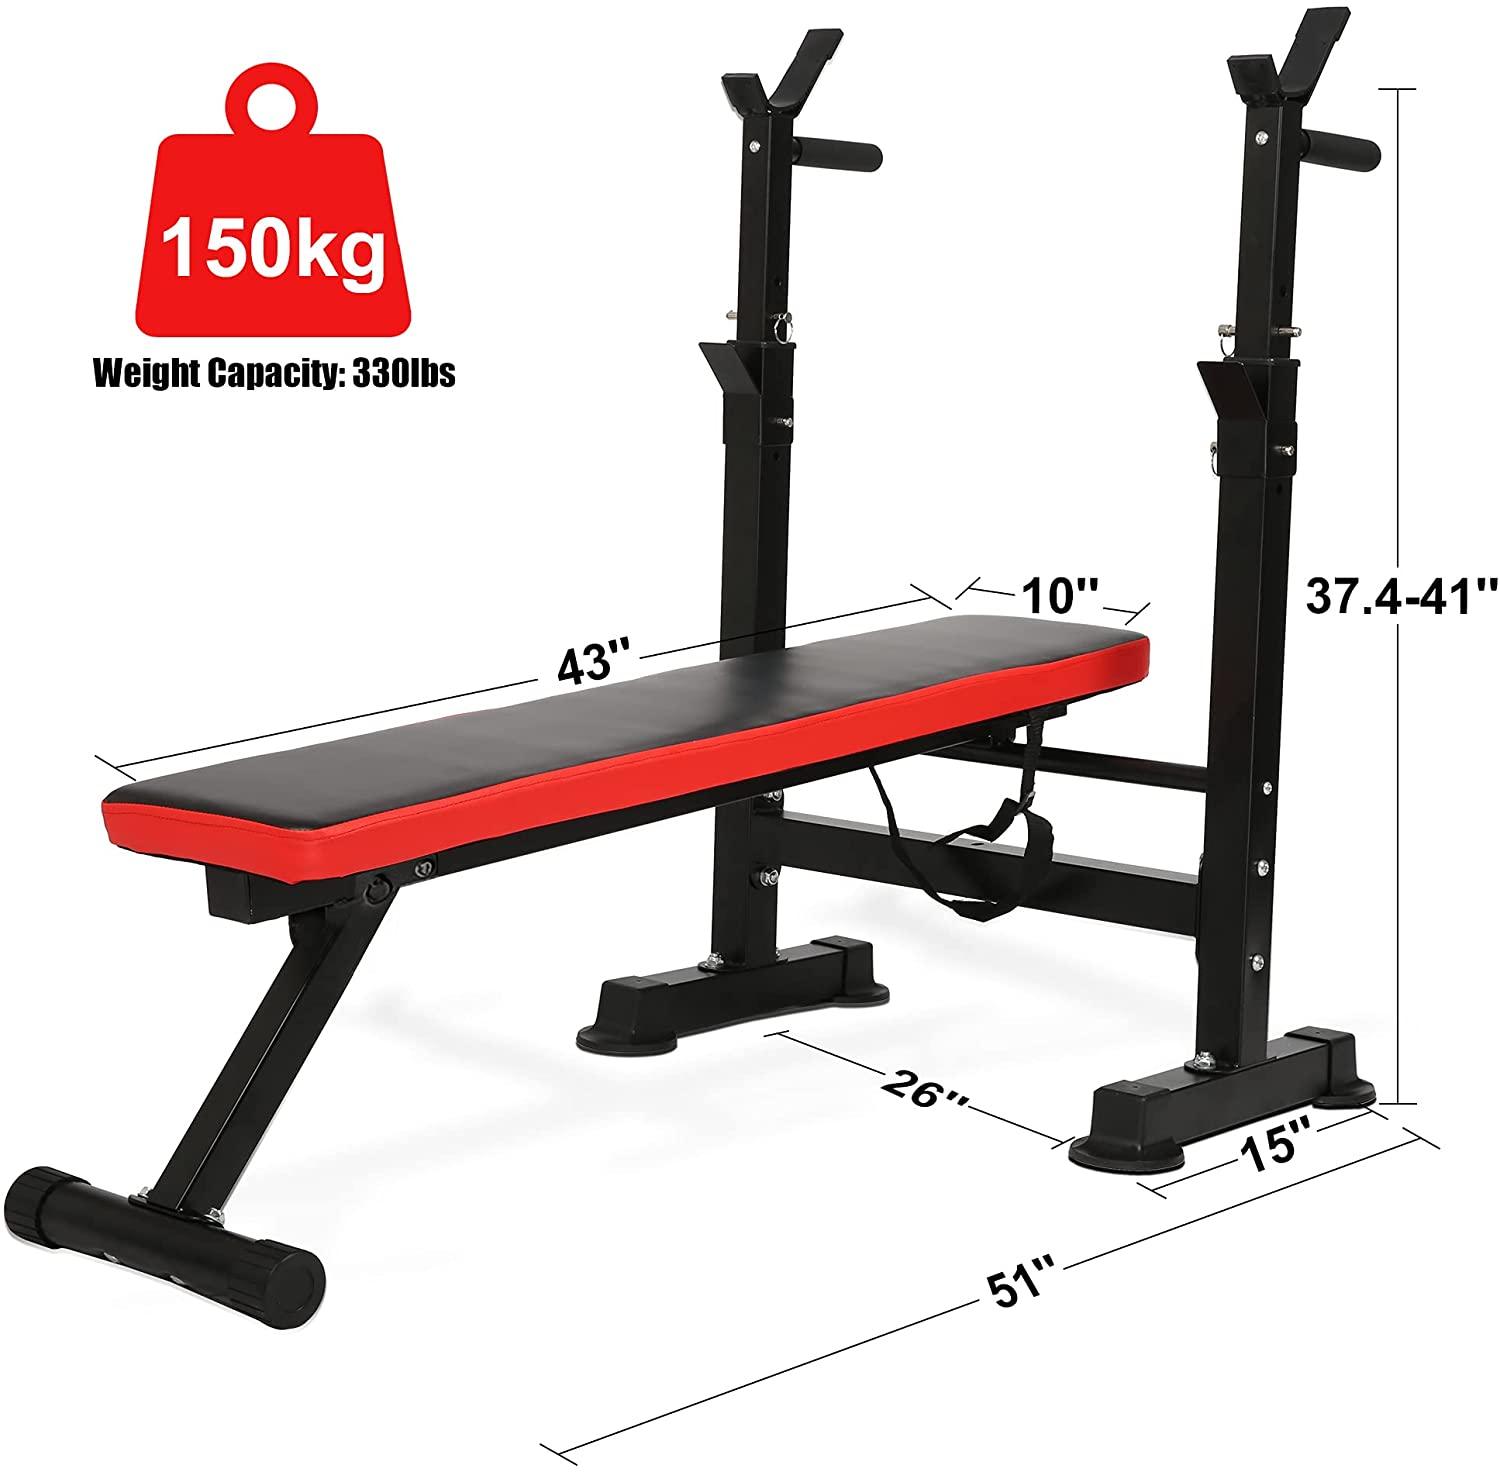 Adjustable Weight Bench Folding Bench Press Multifunction Strength Training Equipment For Full Body Workout Support Up To 330LBS - Bosonshop